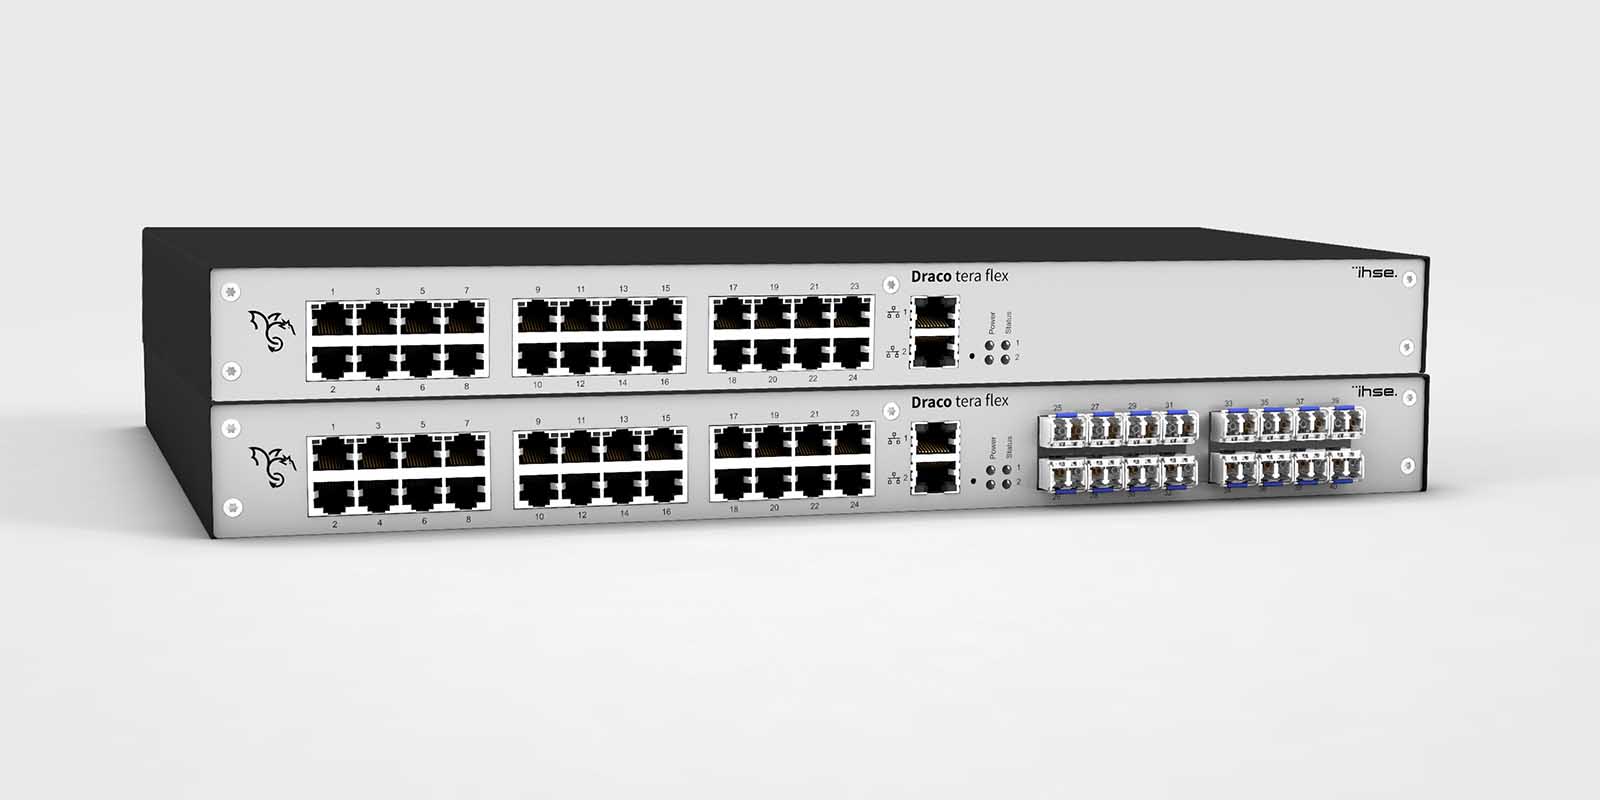 IHSE launches the new Draco Tera Flex series of KVM matrix switches